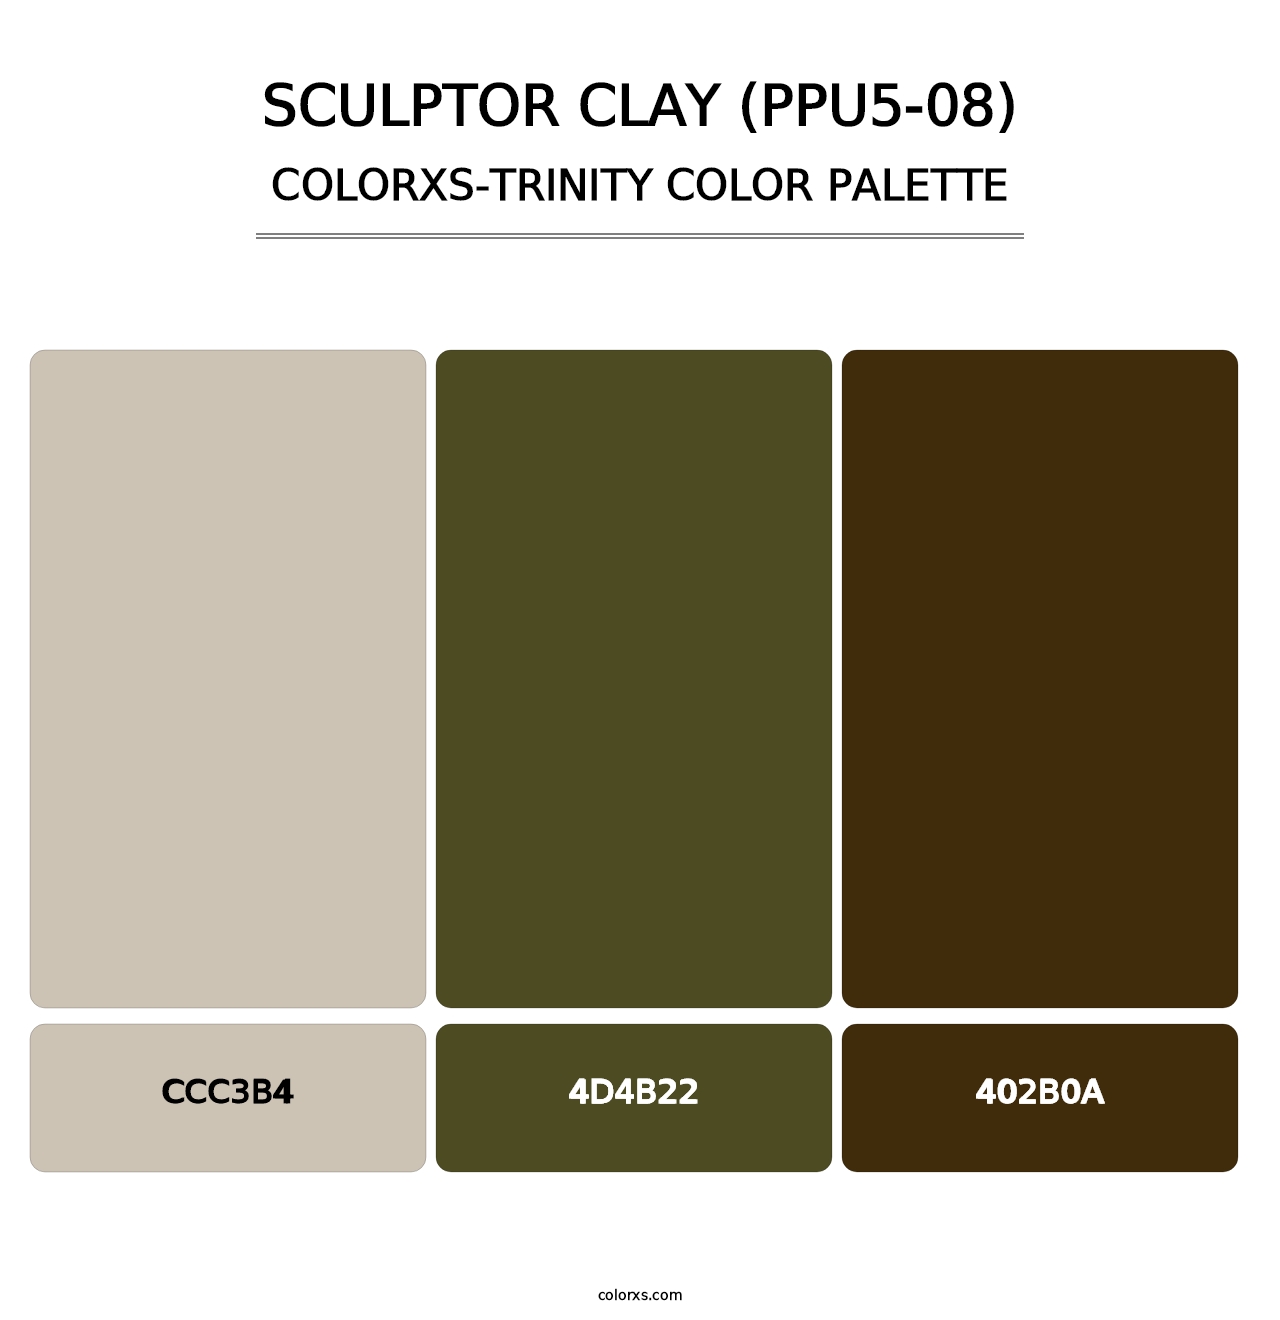 Sculptor Clay (PPU5-08) - Colorxs Trinity Palette